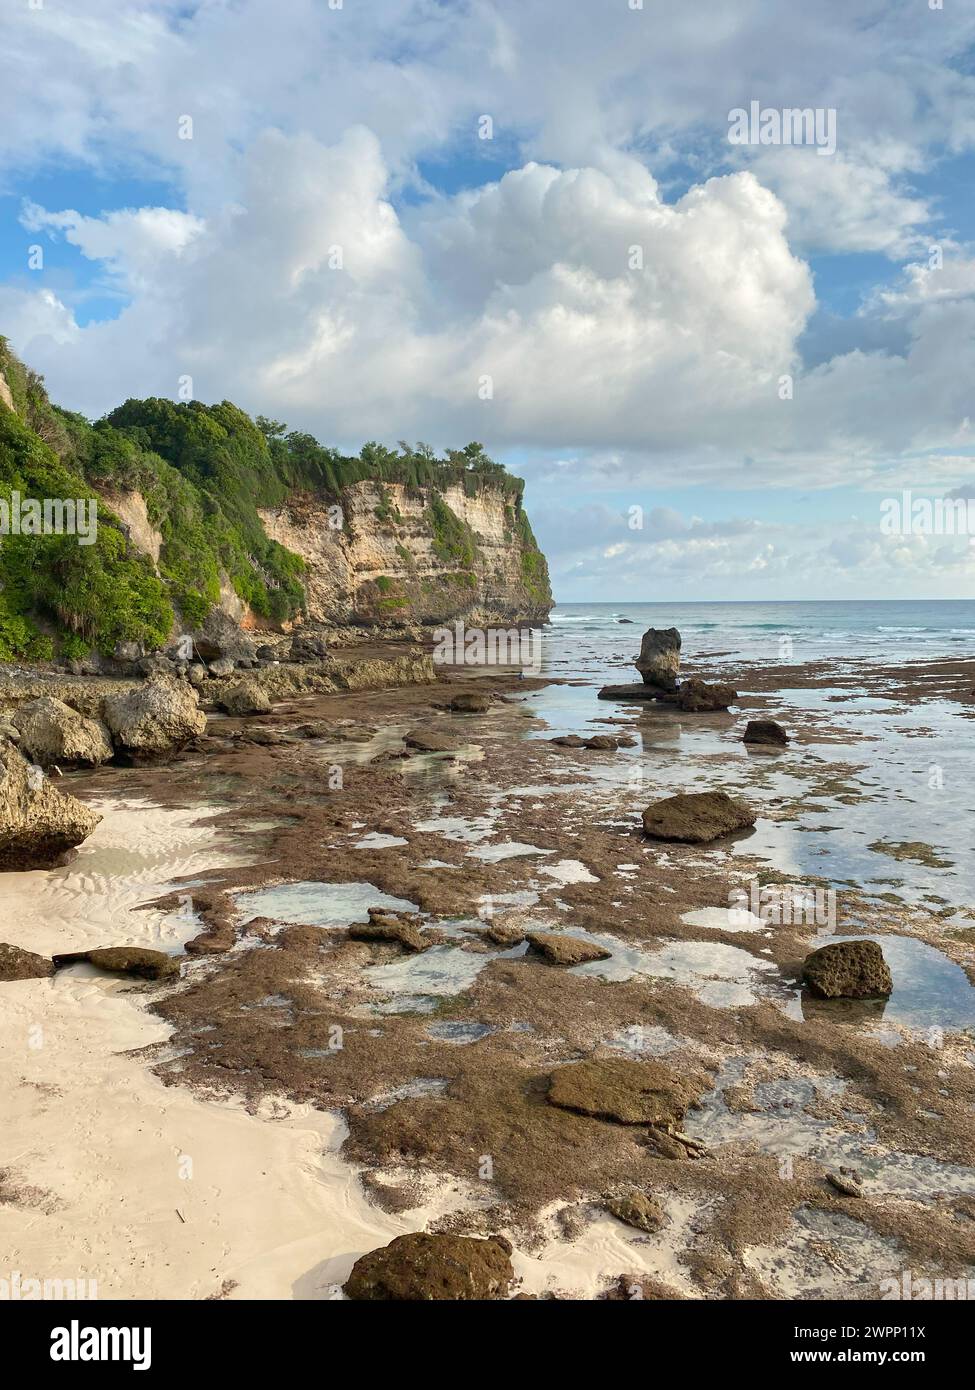 The sheer cliffs of the southern coast of Bali are washed by a clear azure ocean. Bukit Peninsula coastline. Stock Photo